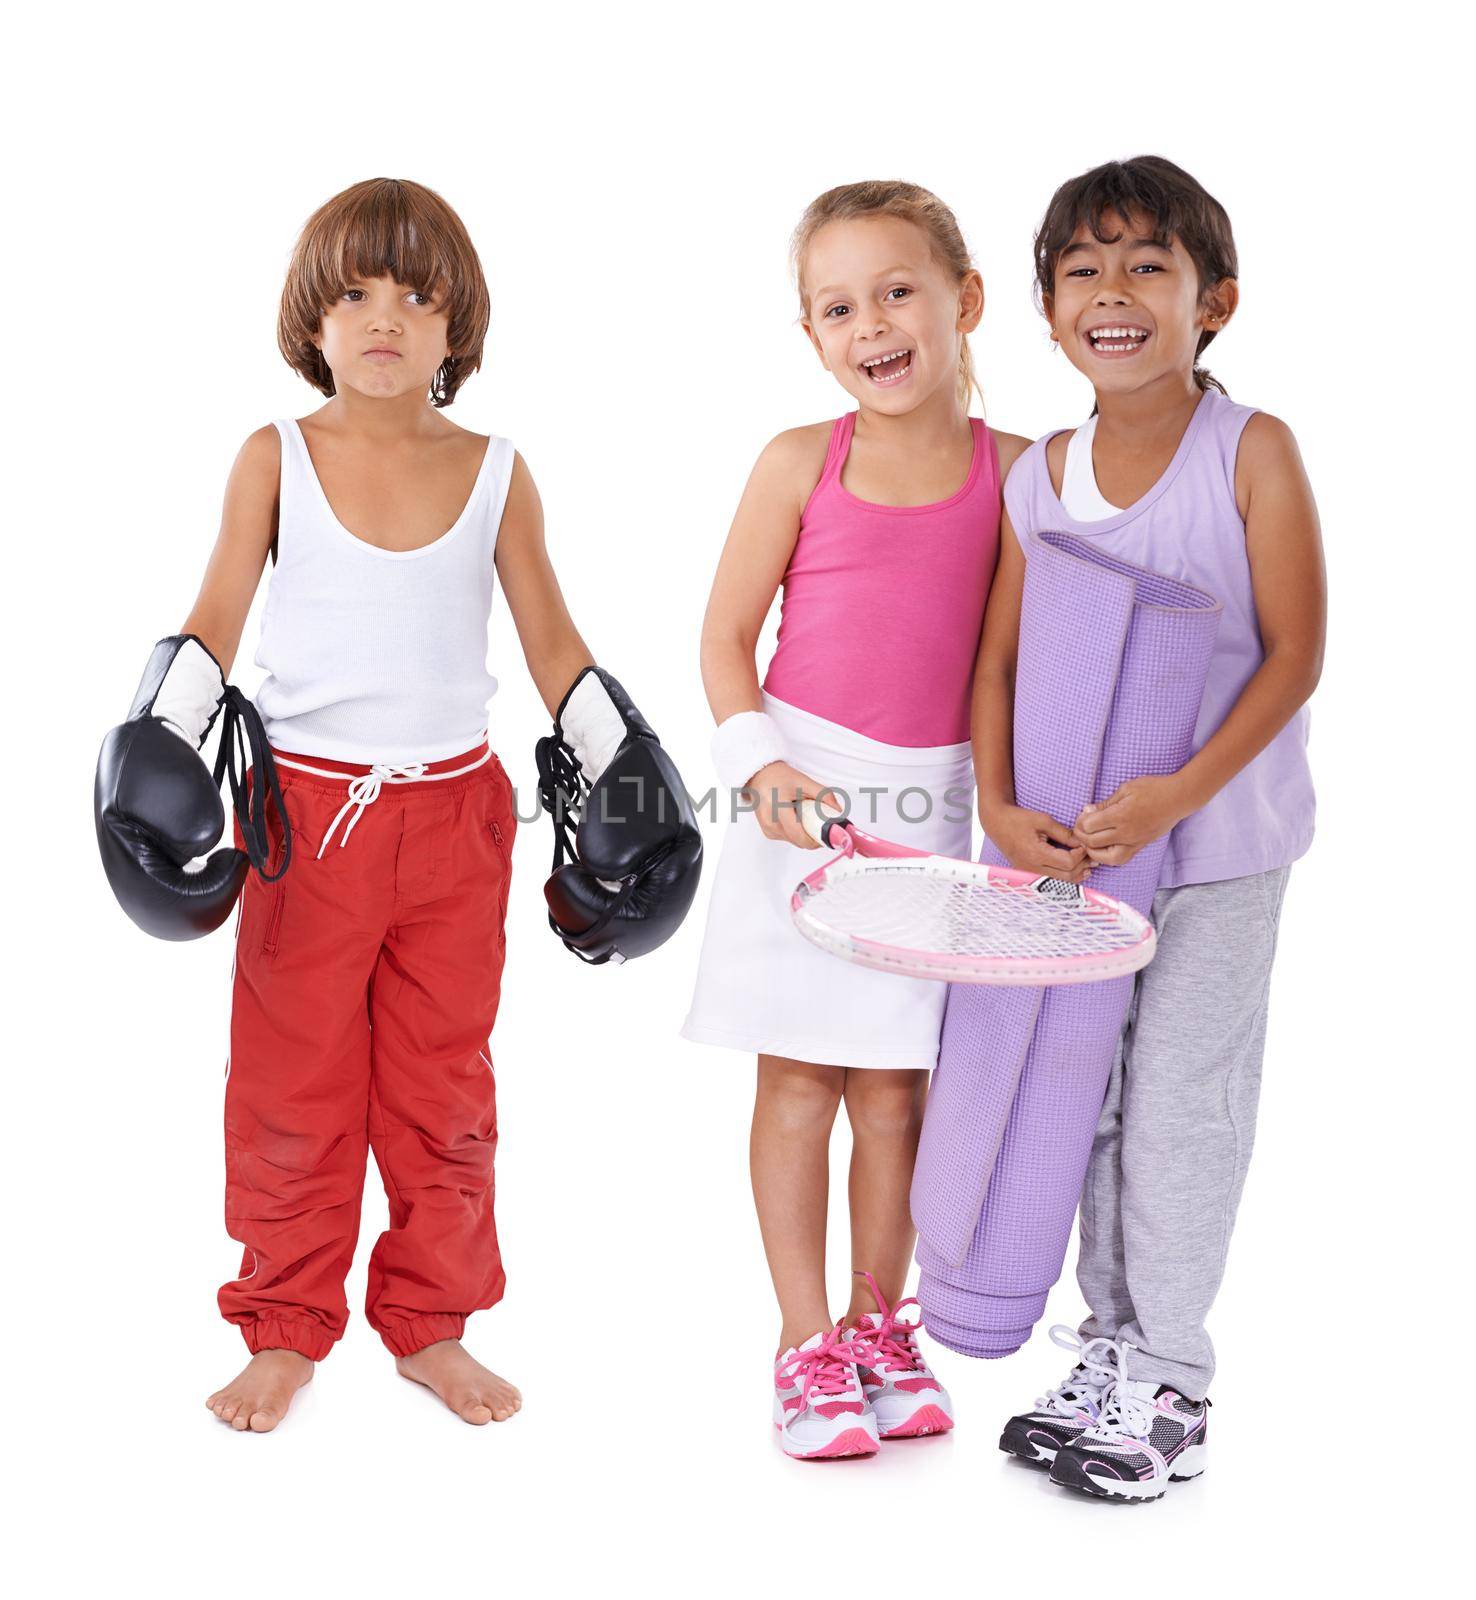 They all have an individual passion. A group of three children in various sports attire